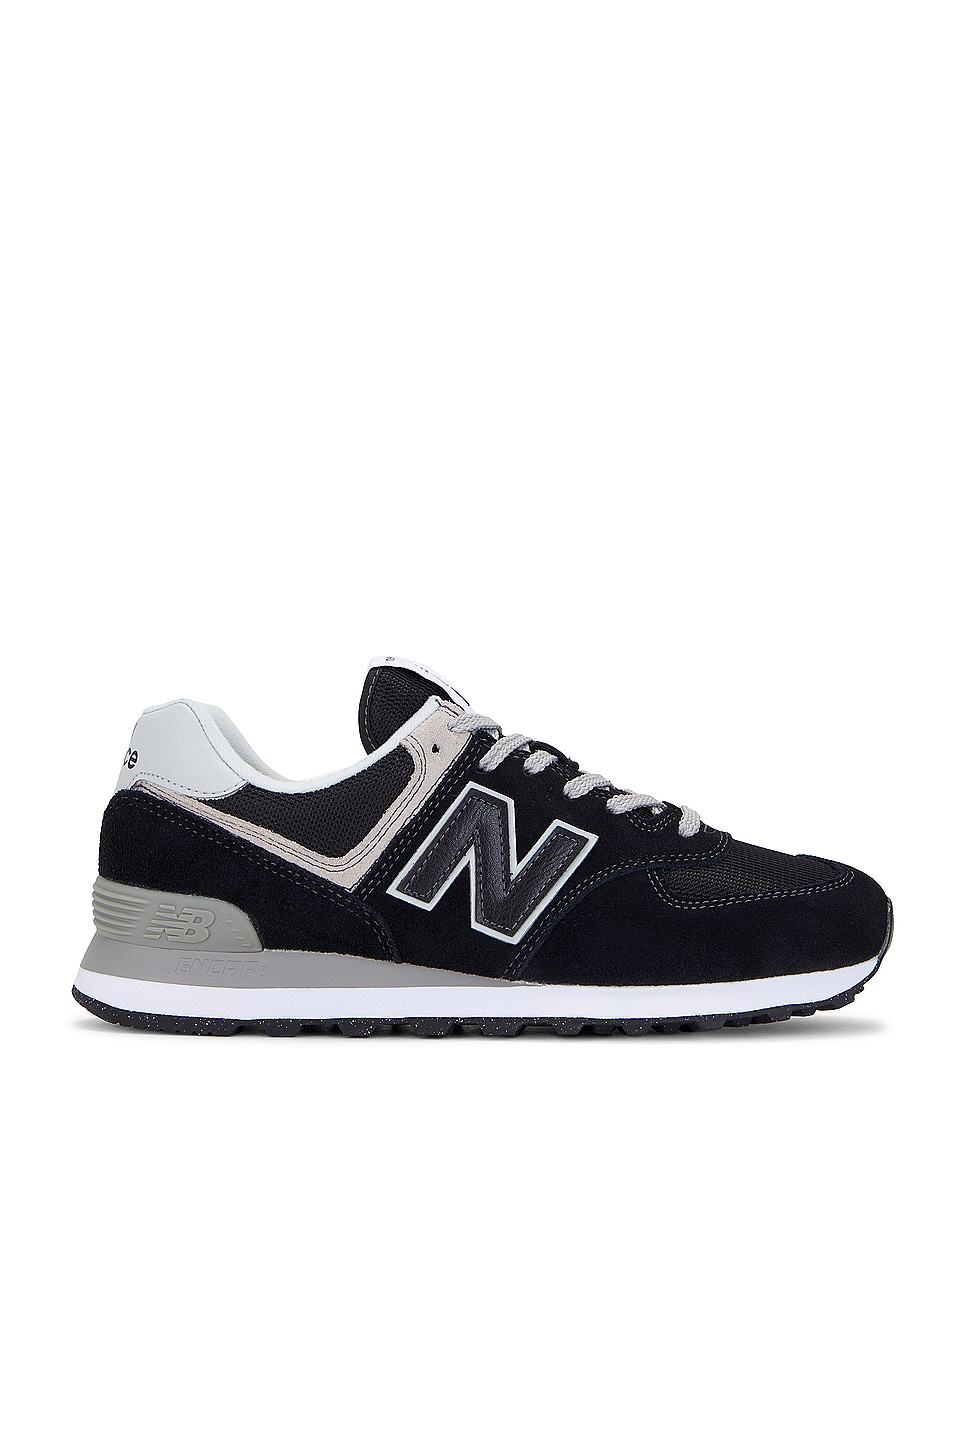 Image 1 of New Balance 574 Core Sneaker in Black & White